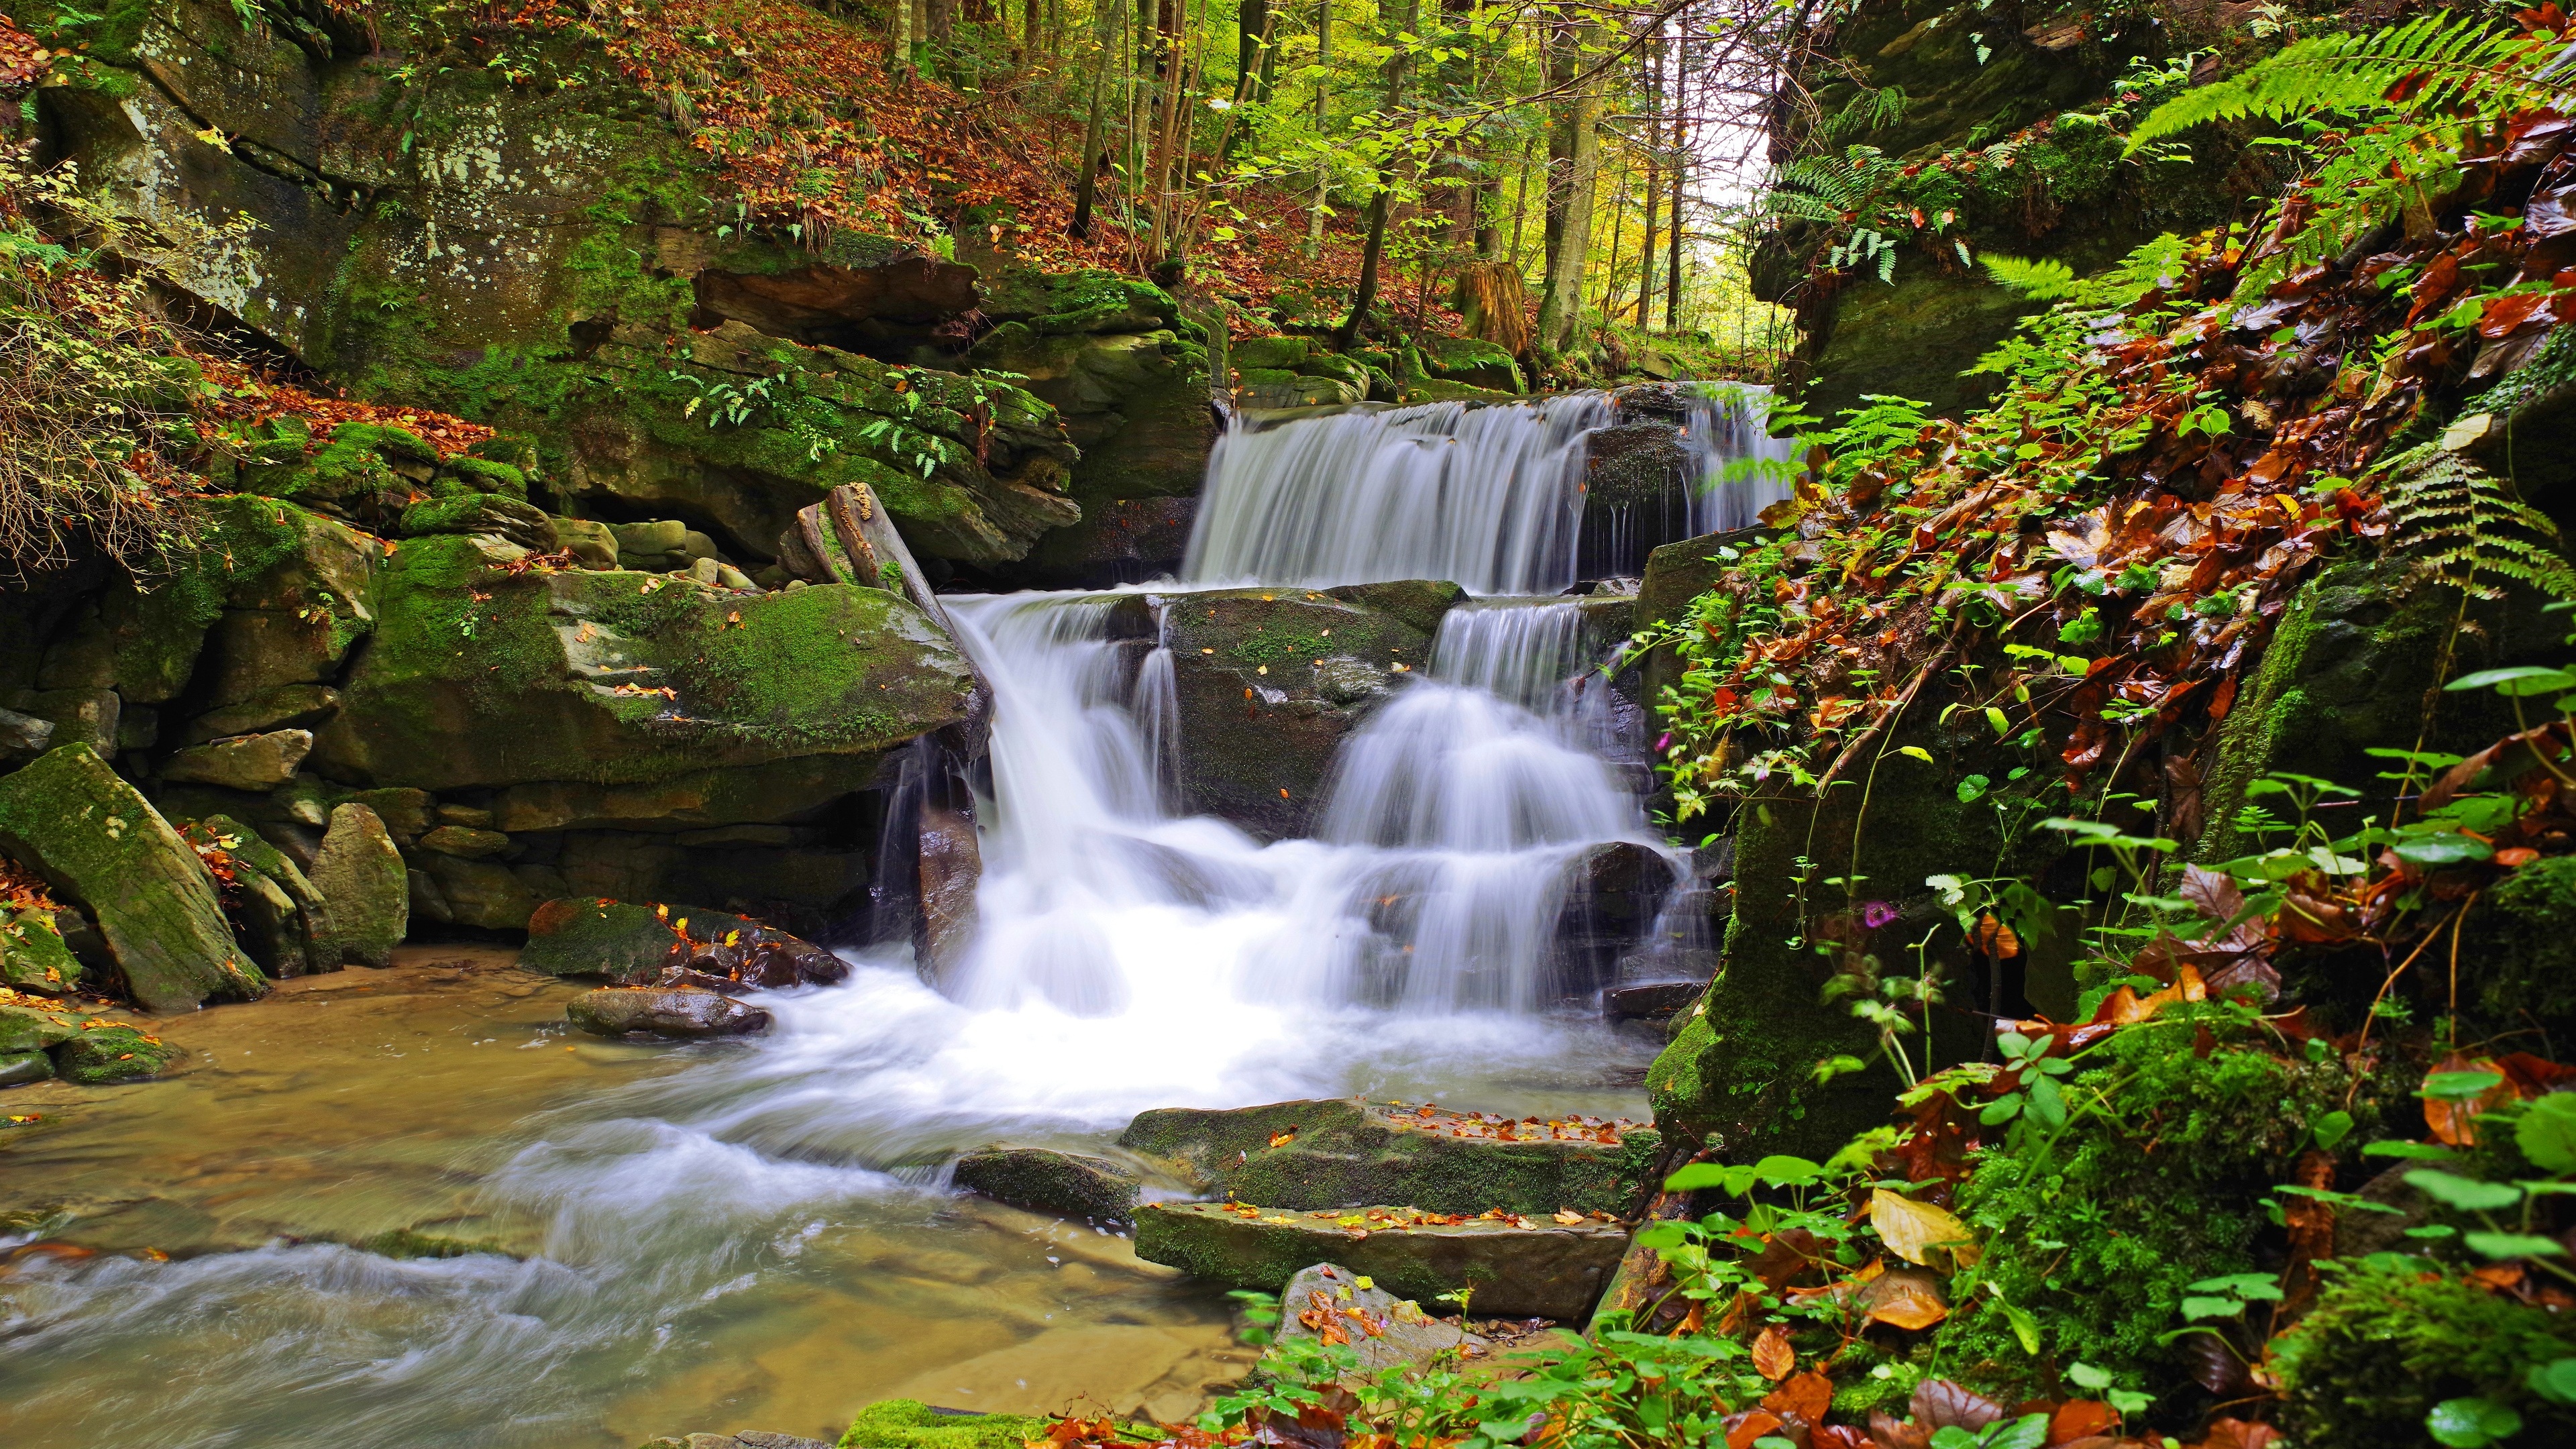 Poland Nature Moss Stones Forest Foliage Waterfall Still Life Rocks Leaves 3840x2160